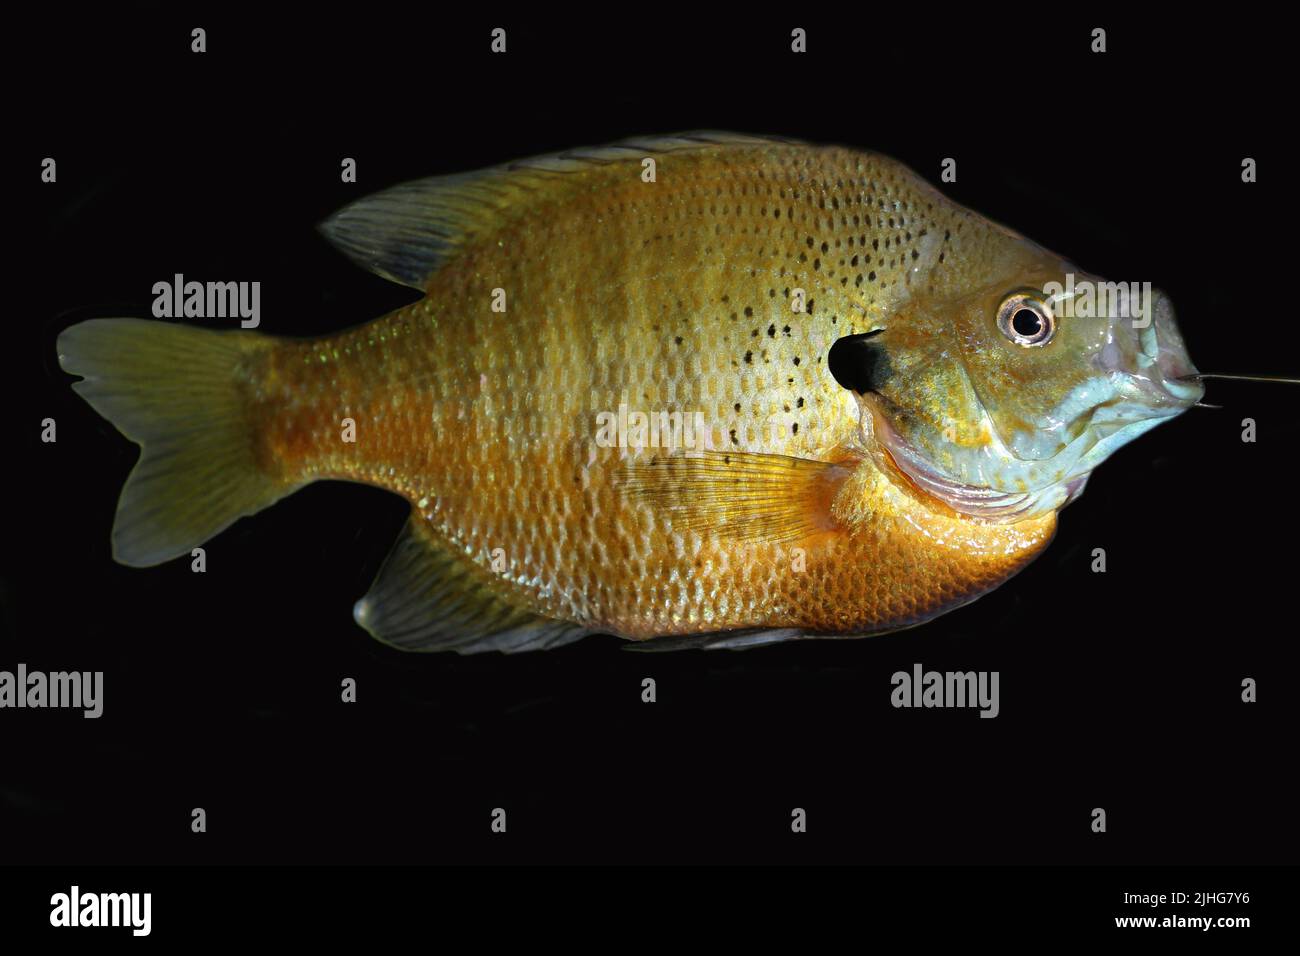 A freshwater sunfish is shown isolated on a black background. Stock Photo